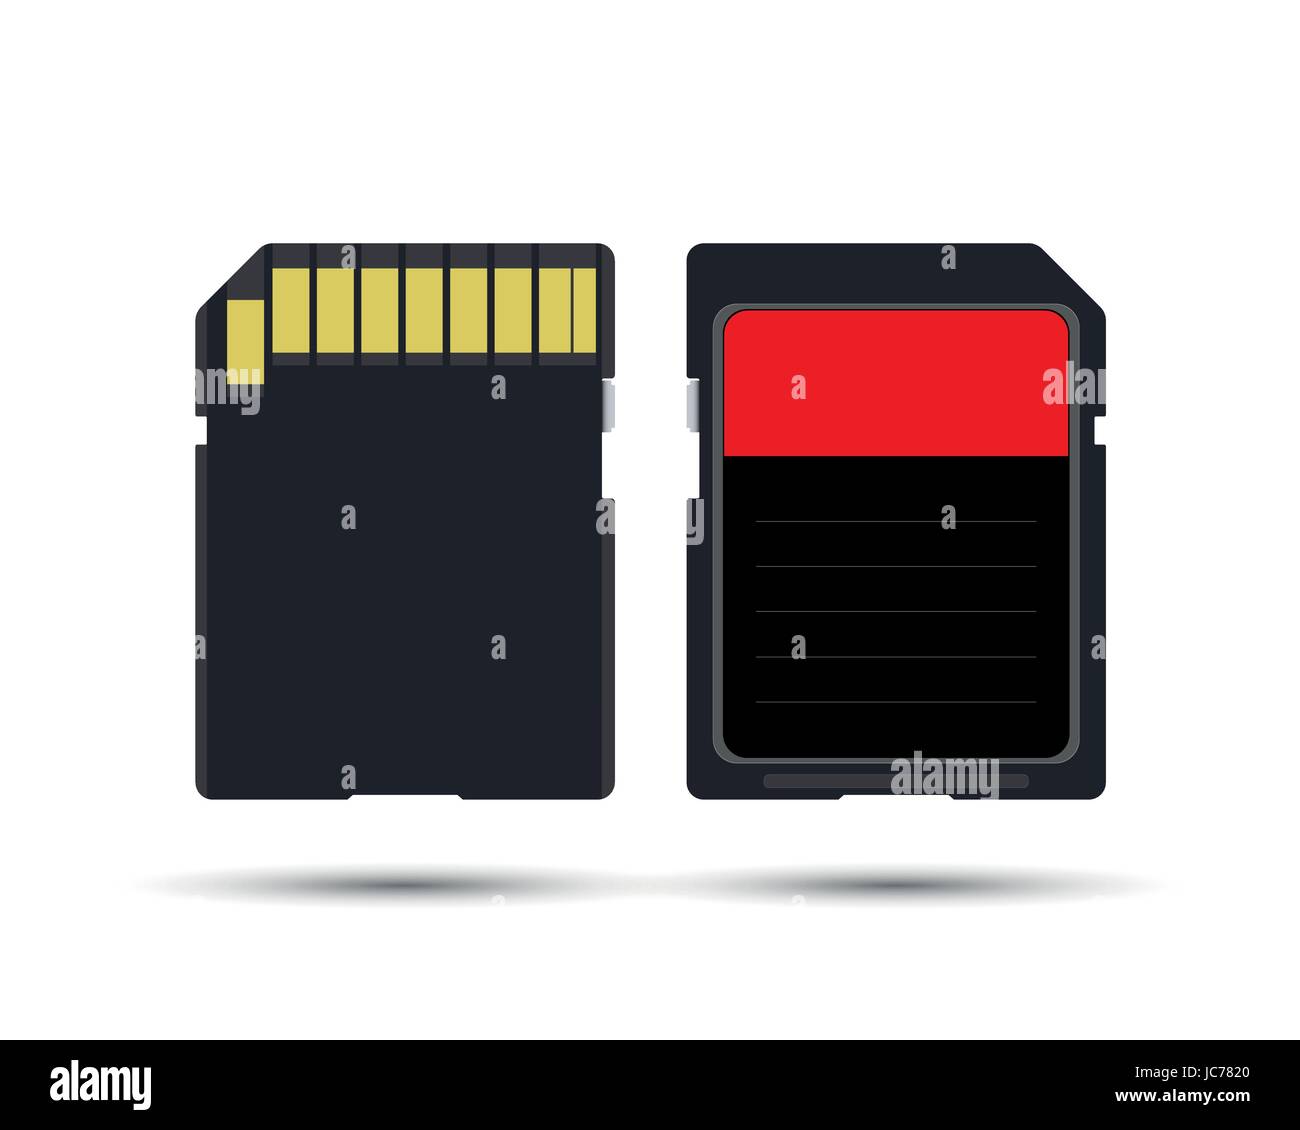 SD card, realistic vector illustration of memory card isolated on white background Stock Vector